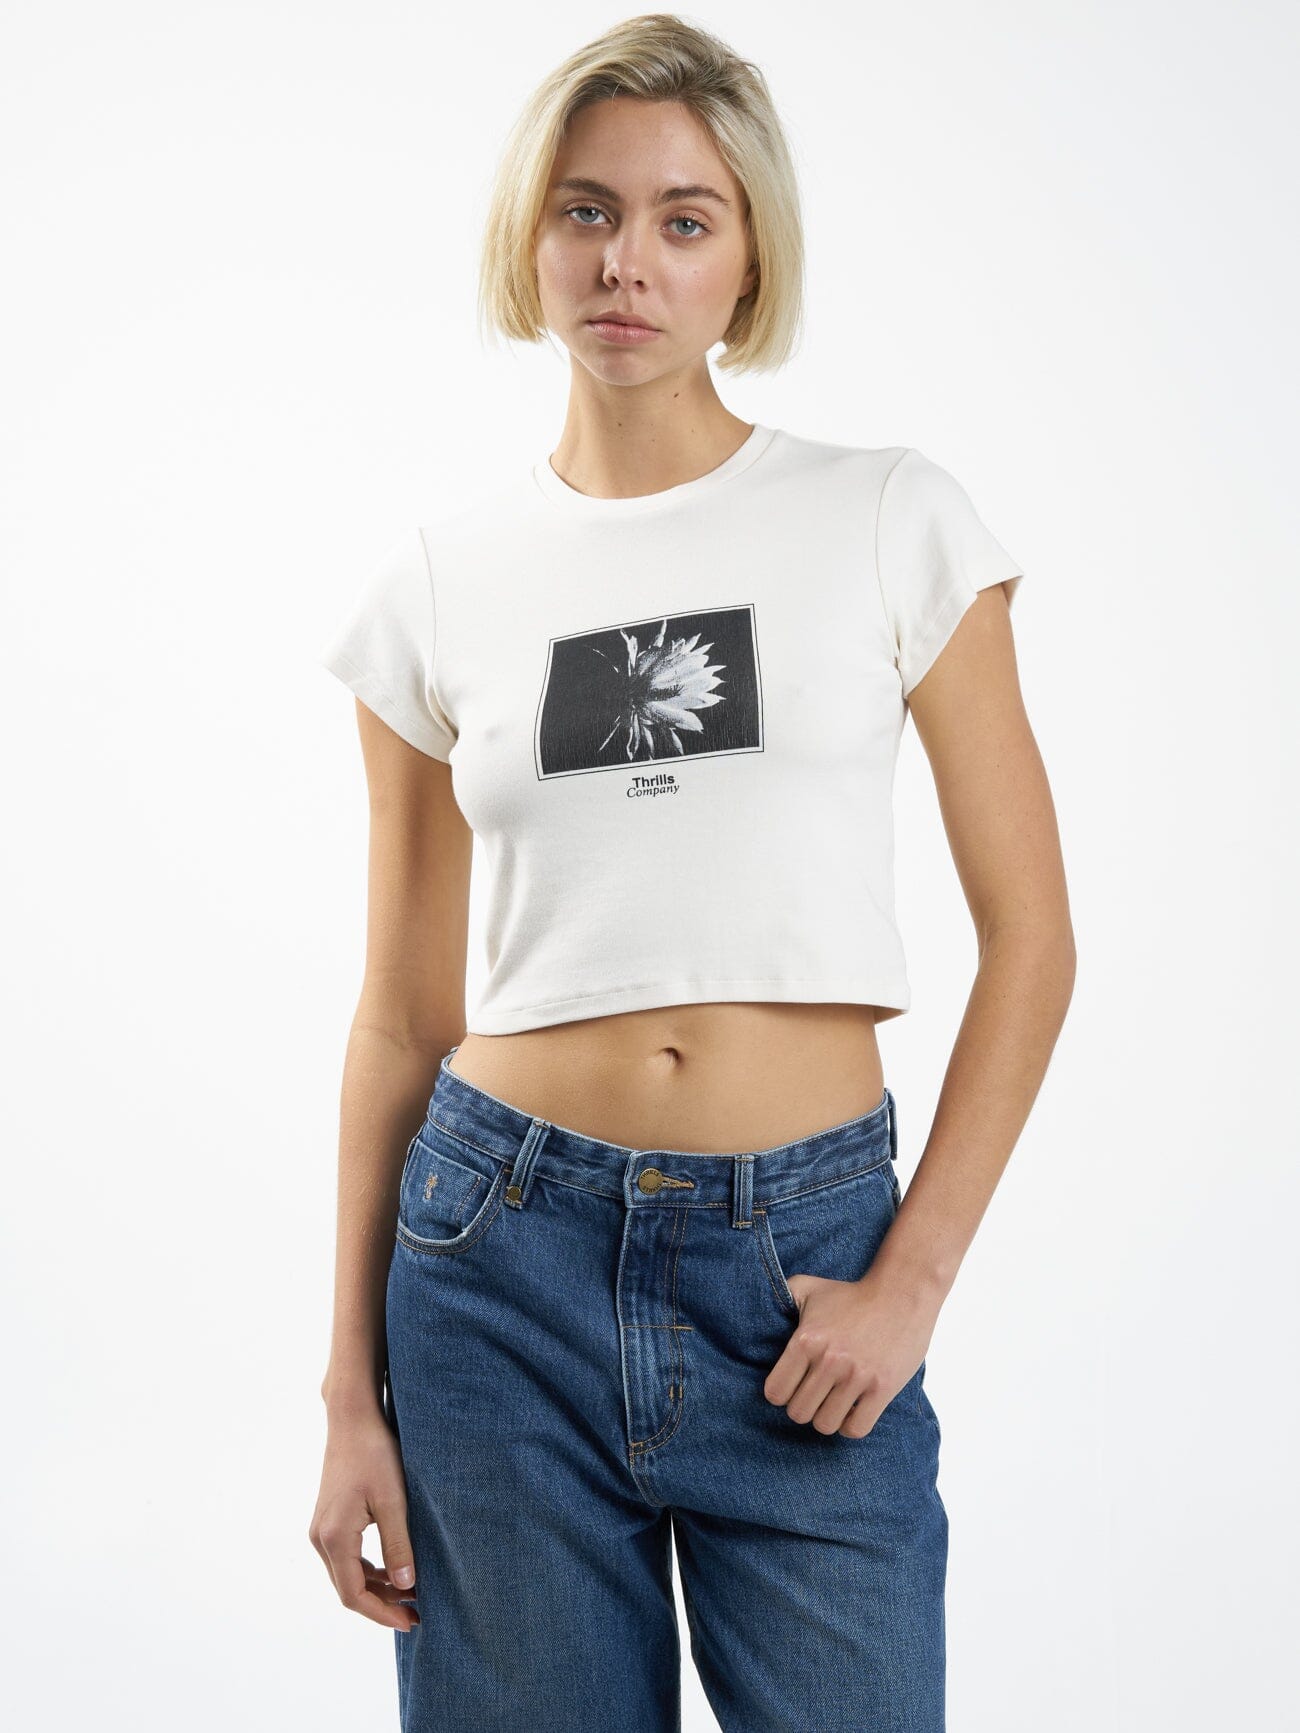 Womens Graphic Tees - Shop Now